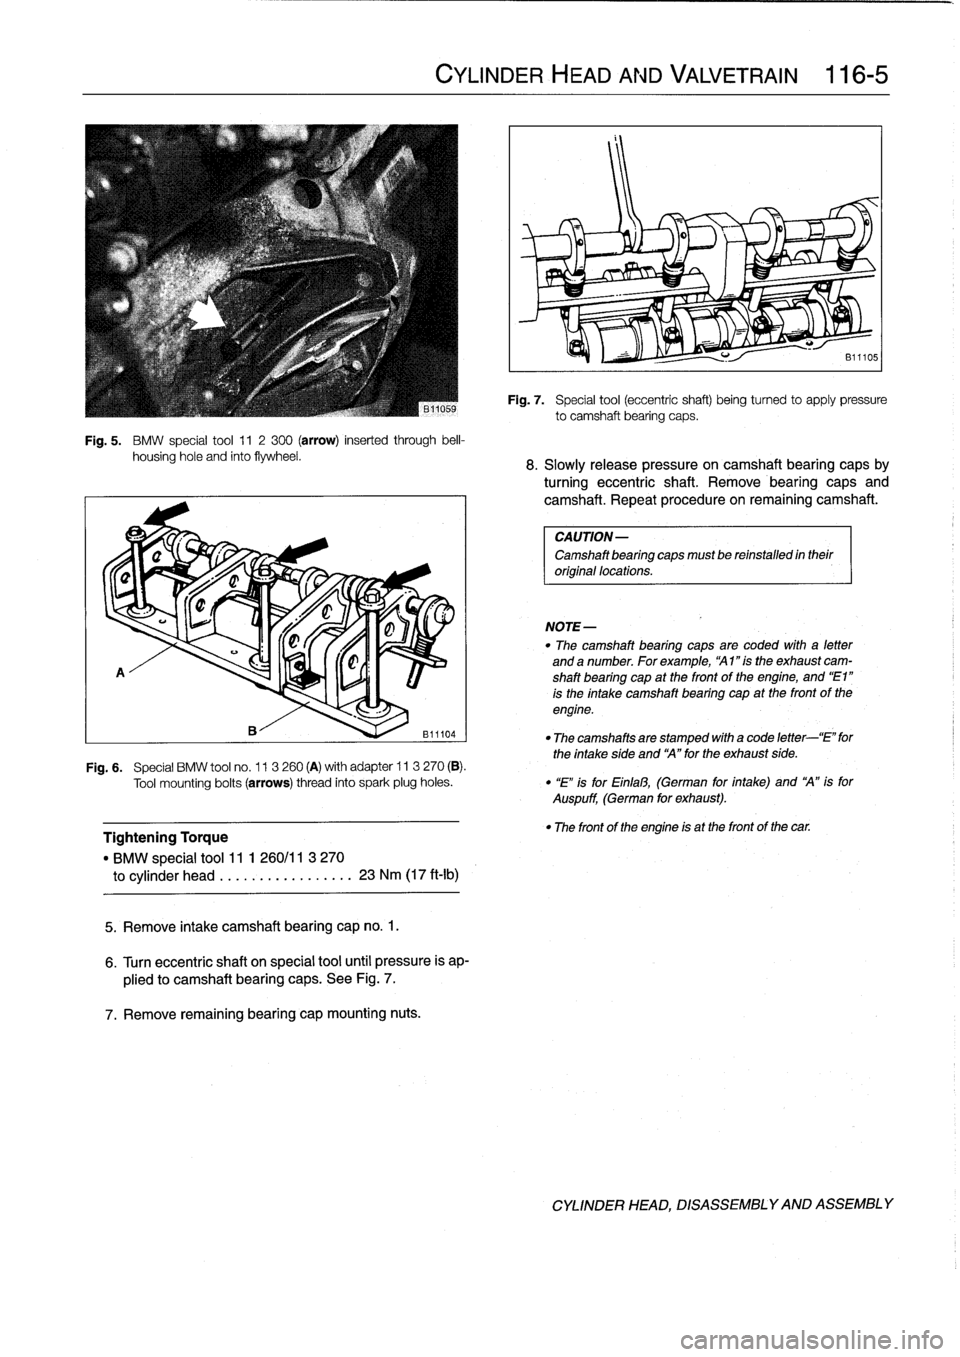 BMW 325i 1994 E36 Workshop Manual 
Fig
.
5
.

	

BMW
special
tool
11
2300
(arrow)
inserted
through
bell-
housing
hole
and
finto
flywheel
.

A

Tightening
Torque

"
BMW
special
tool11
1
260/11
3
270

to
cylinder
head
.................
